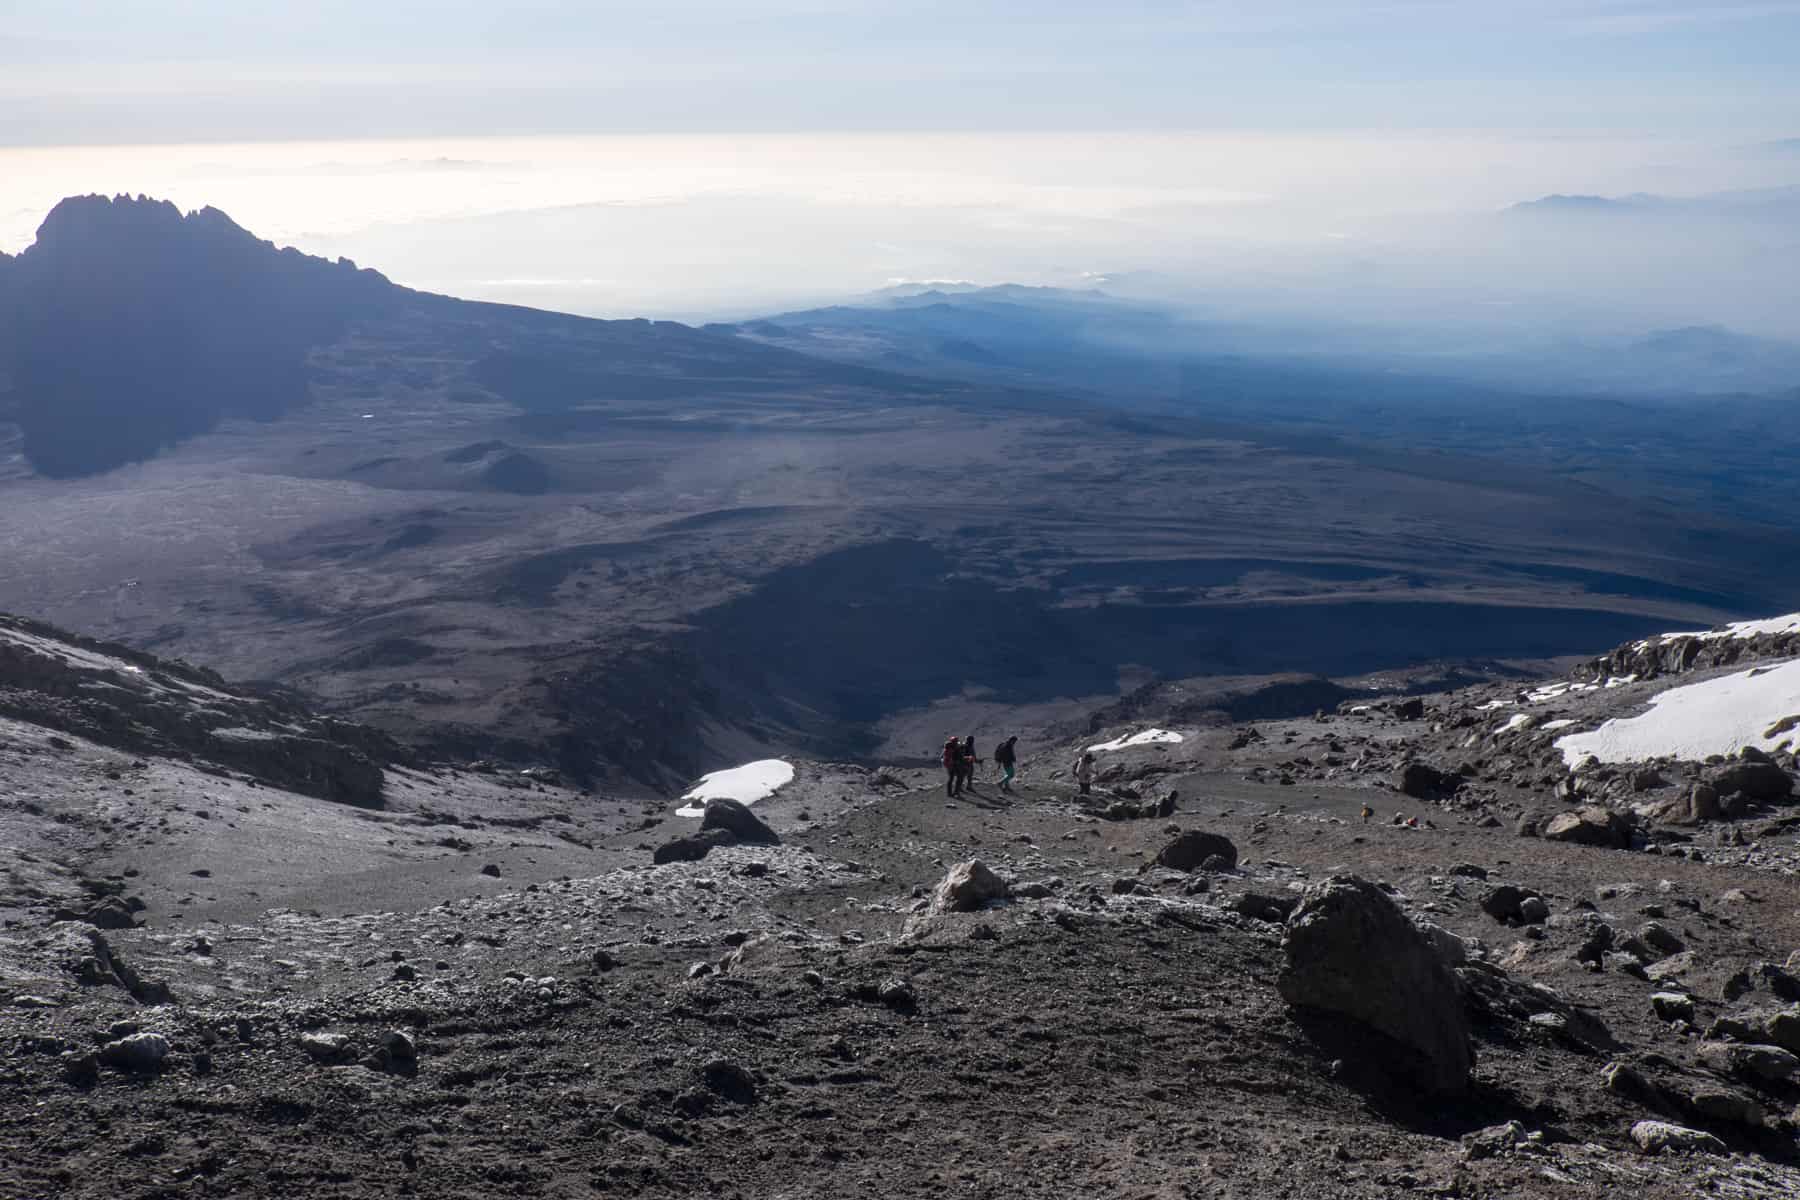 Four people climb up the dark, wide rocky pathway of Kilimanjaro's peak, backed by large volcanic slopes and small patches of melting snow.